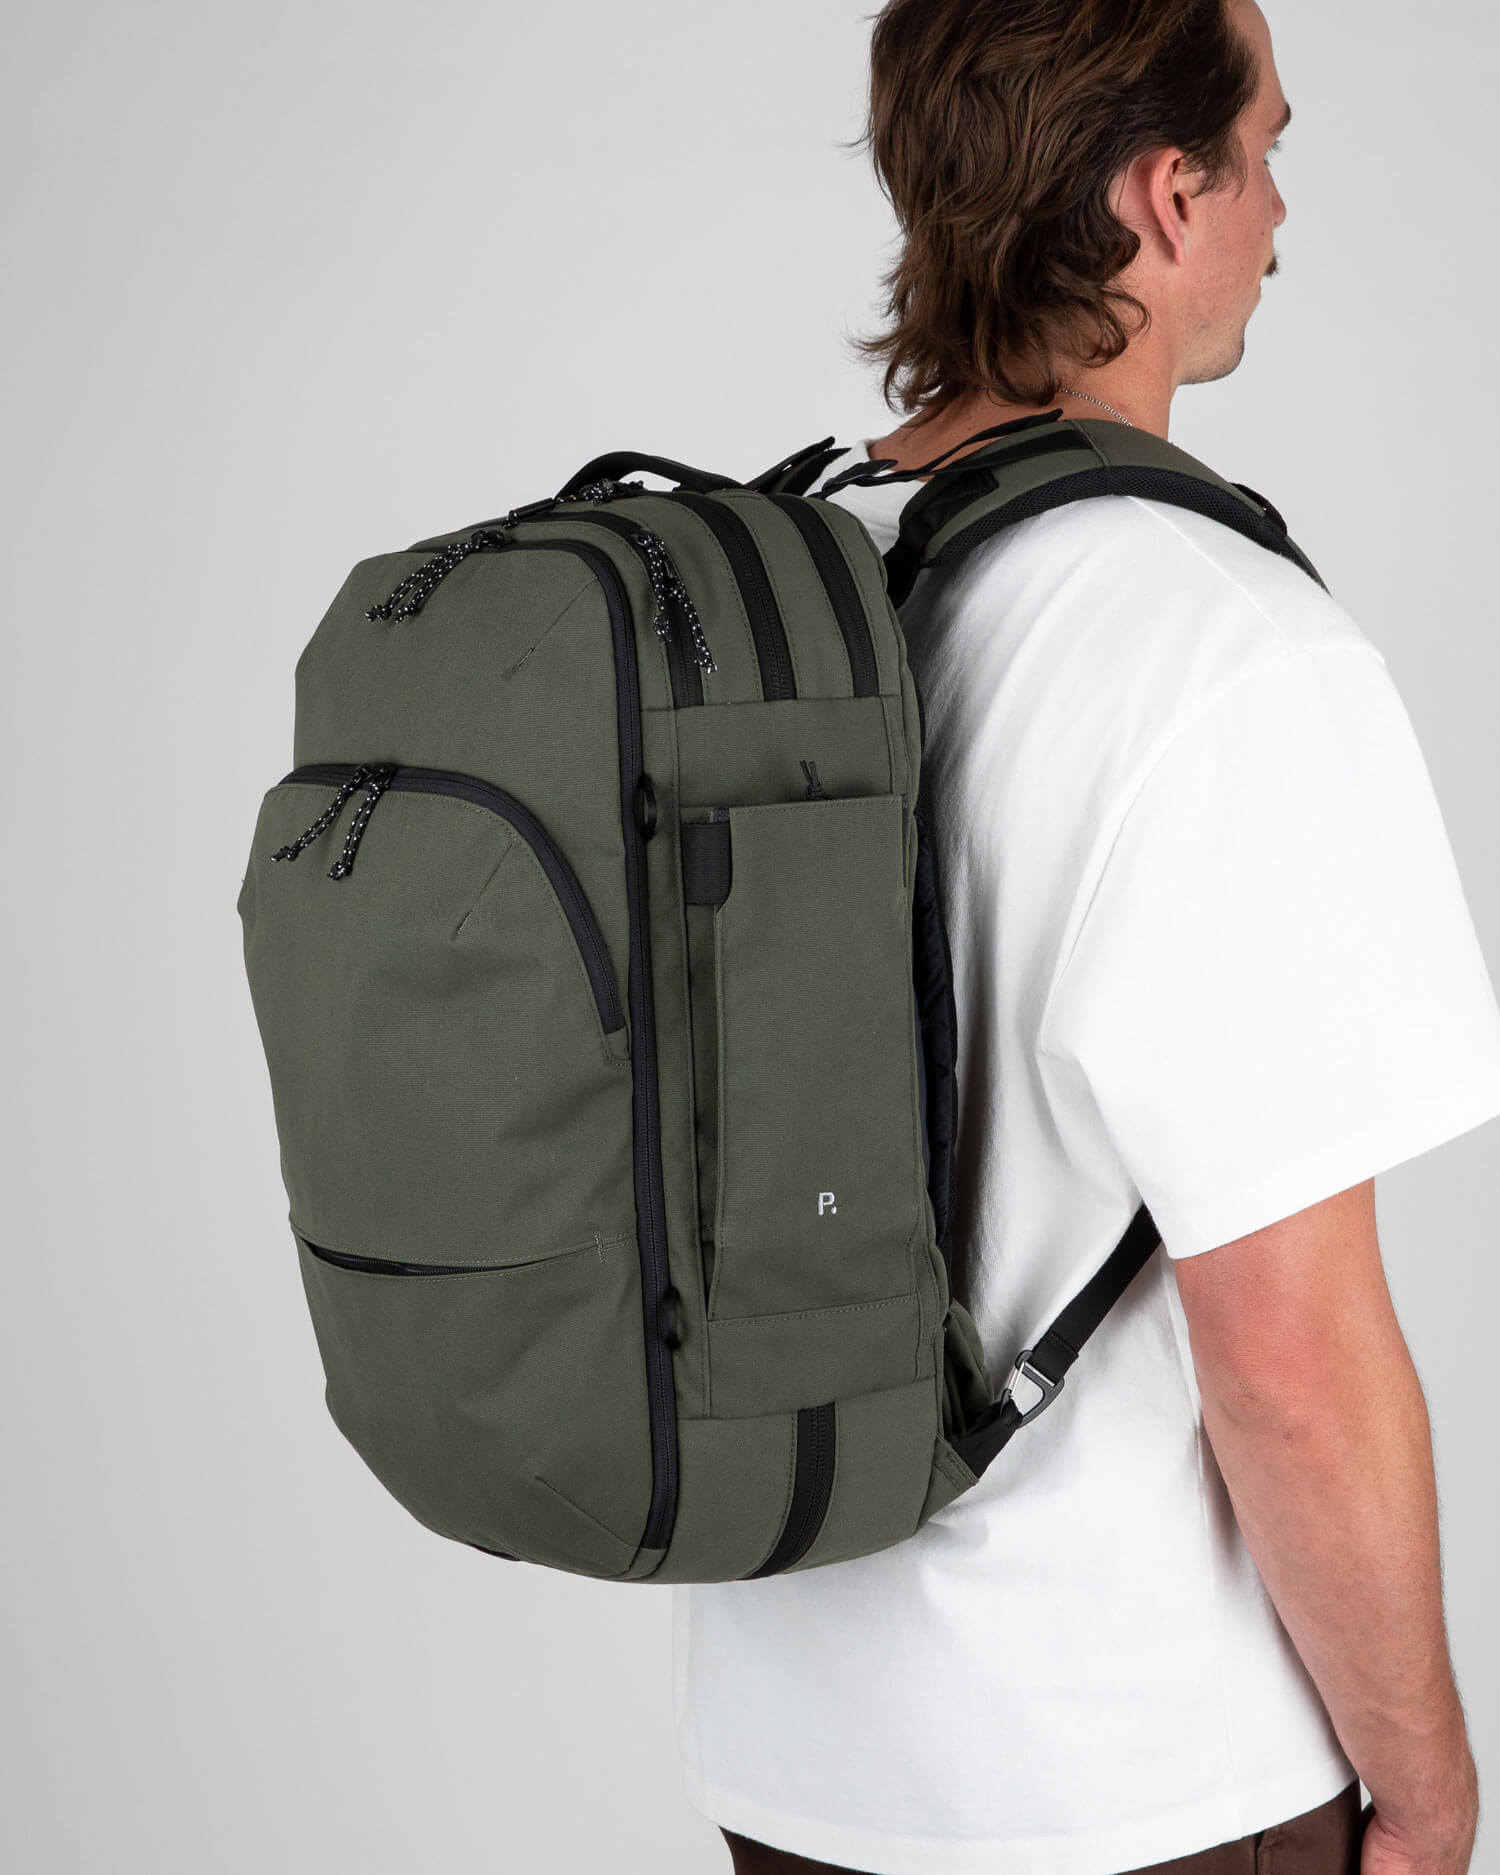 Man carrying green backpack